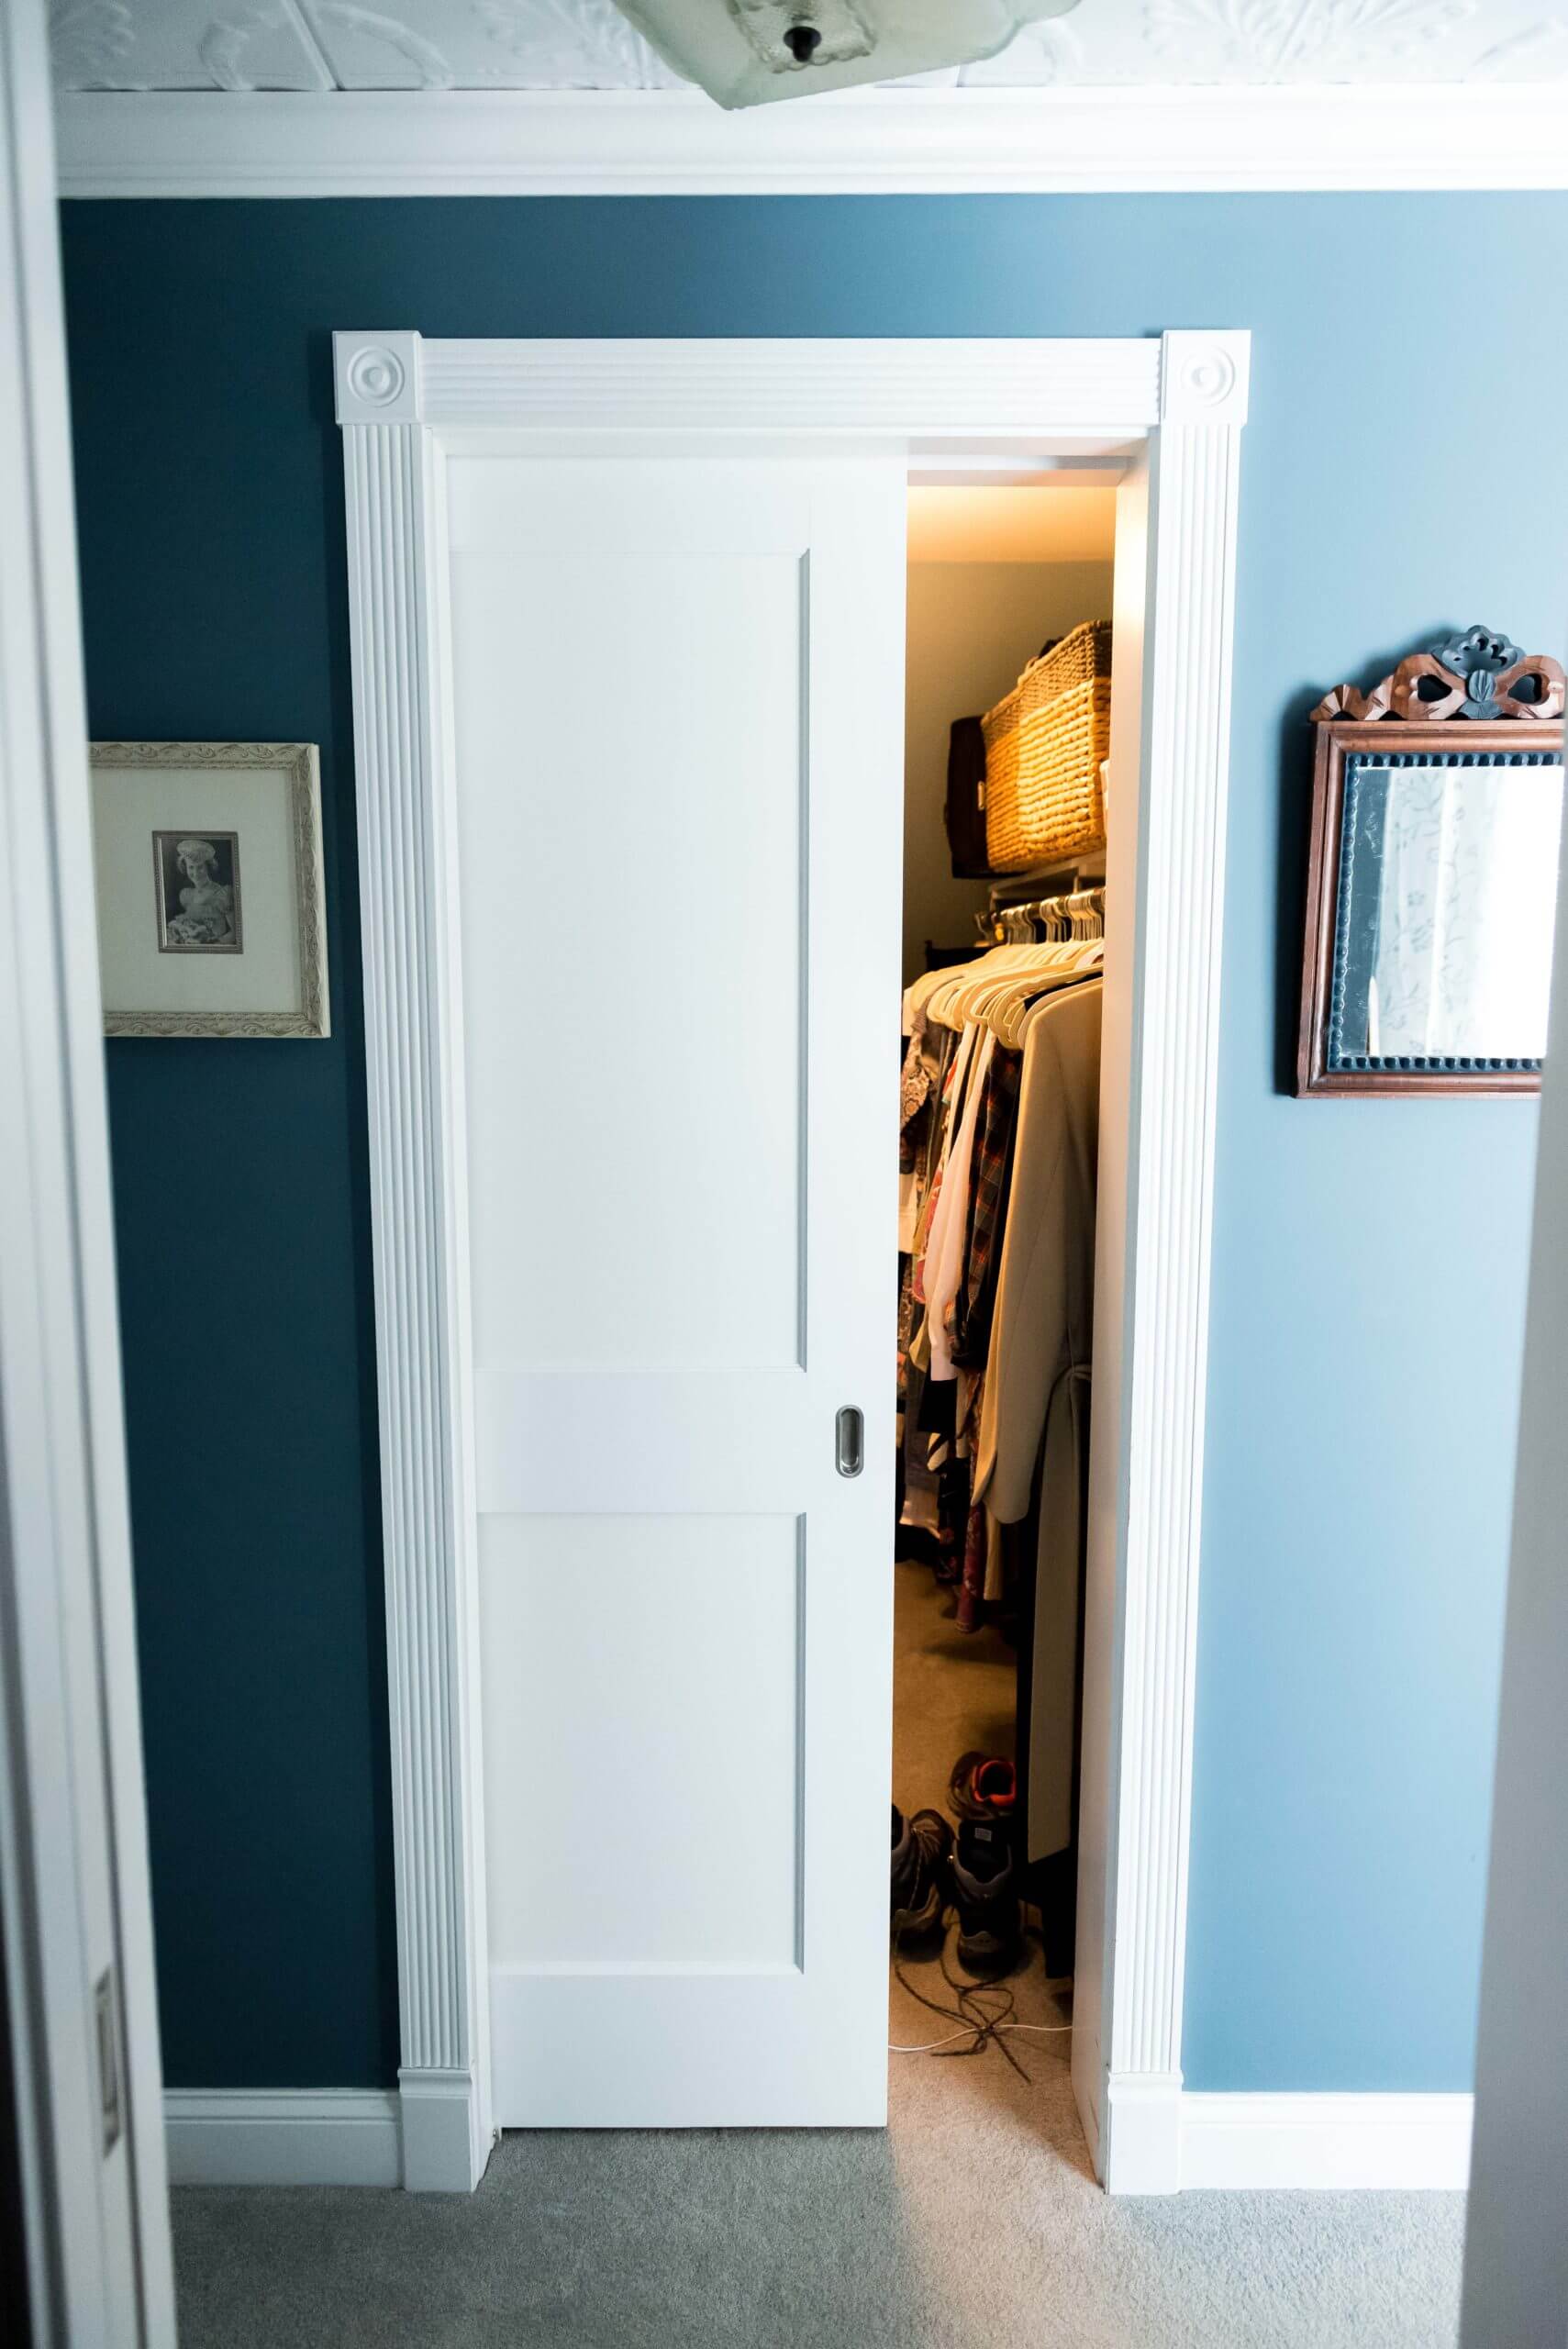 A view outside of a closet. The door is halfway open and the light is on.